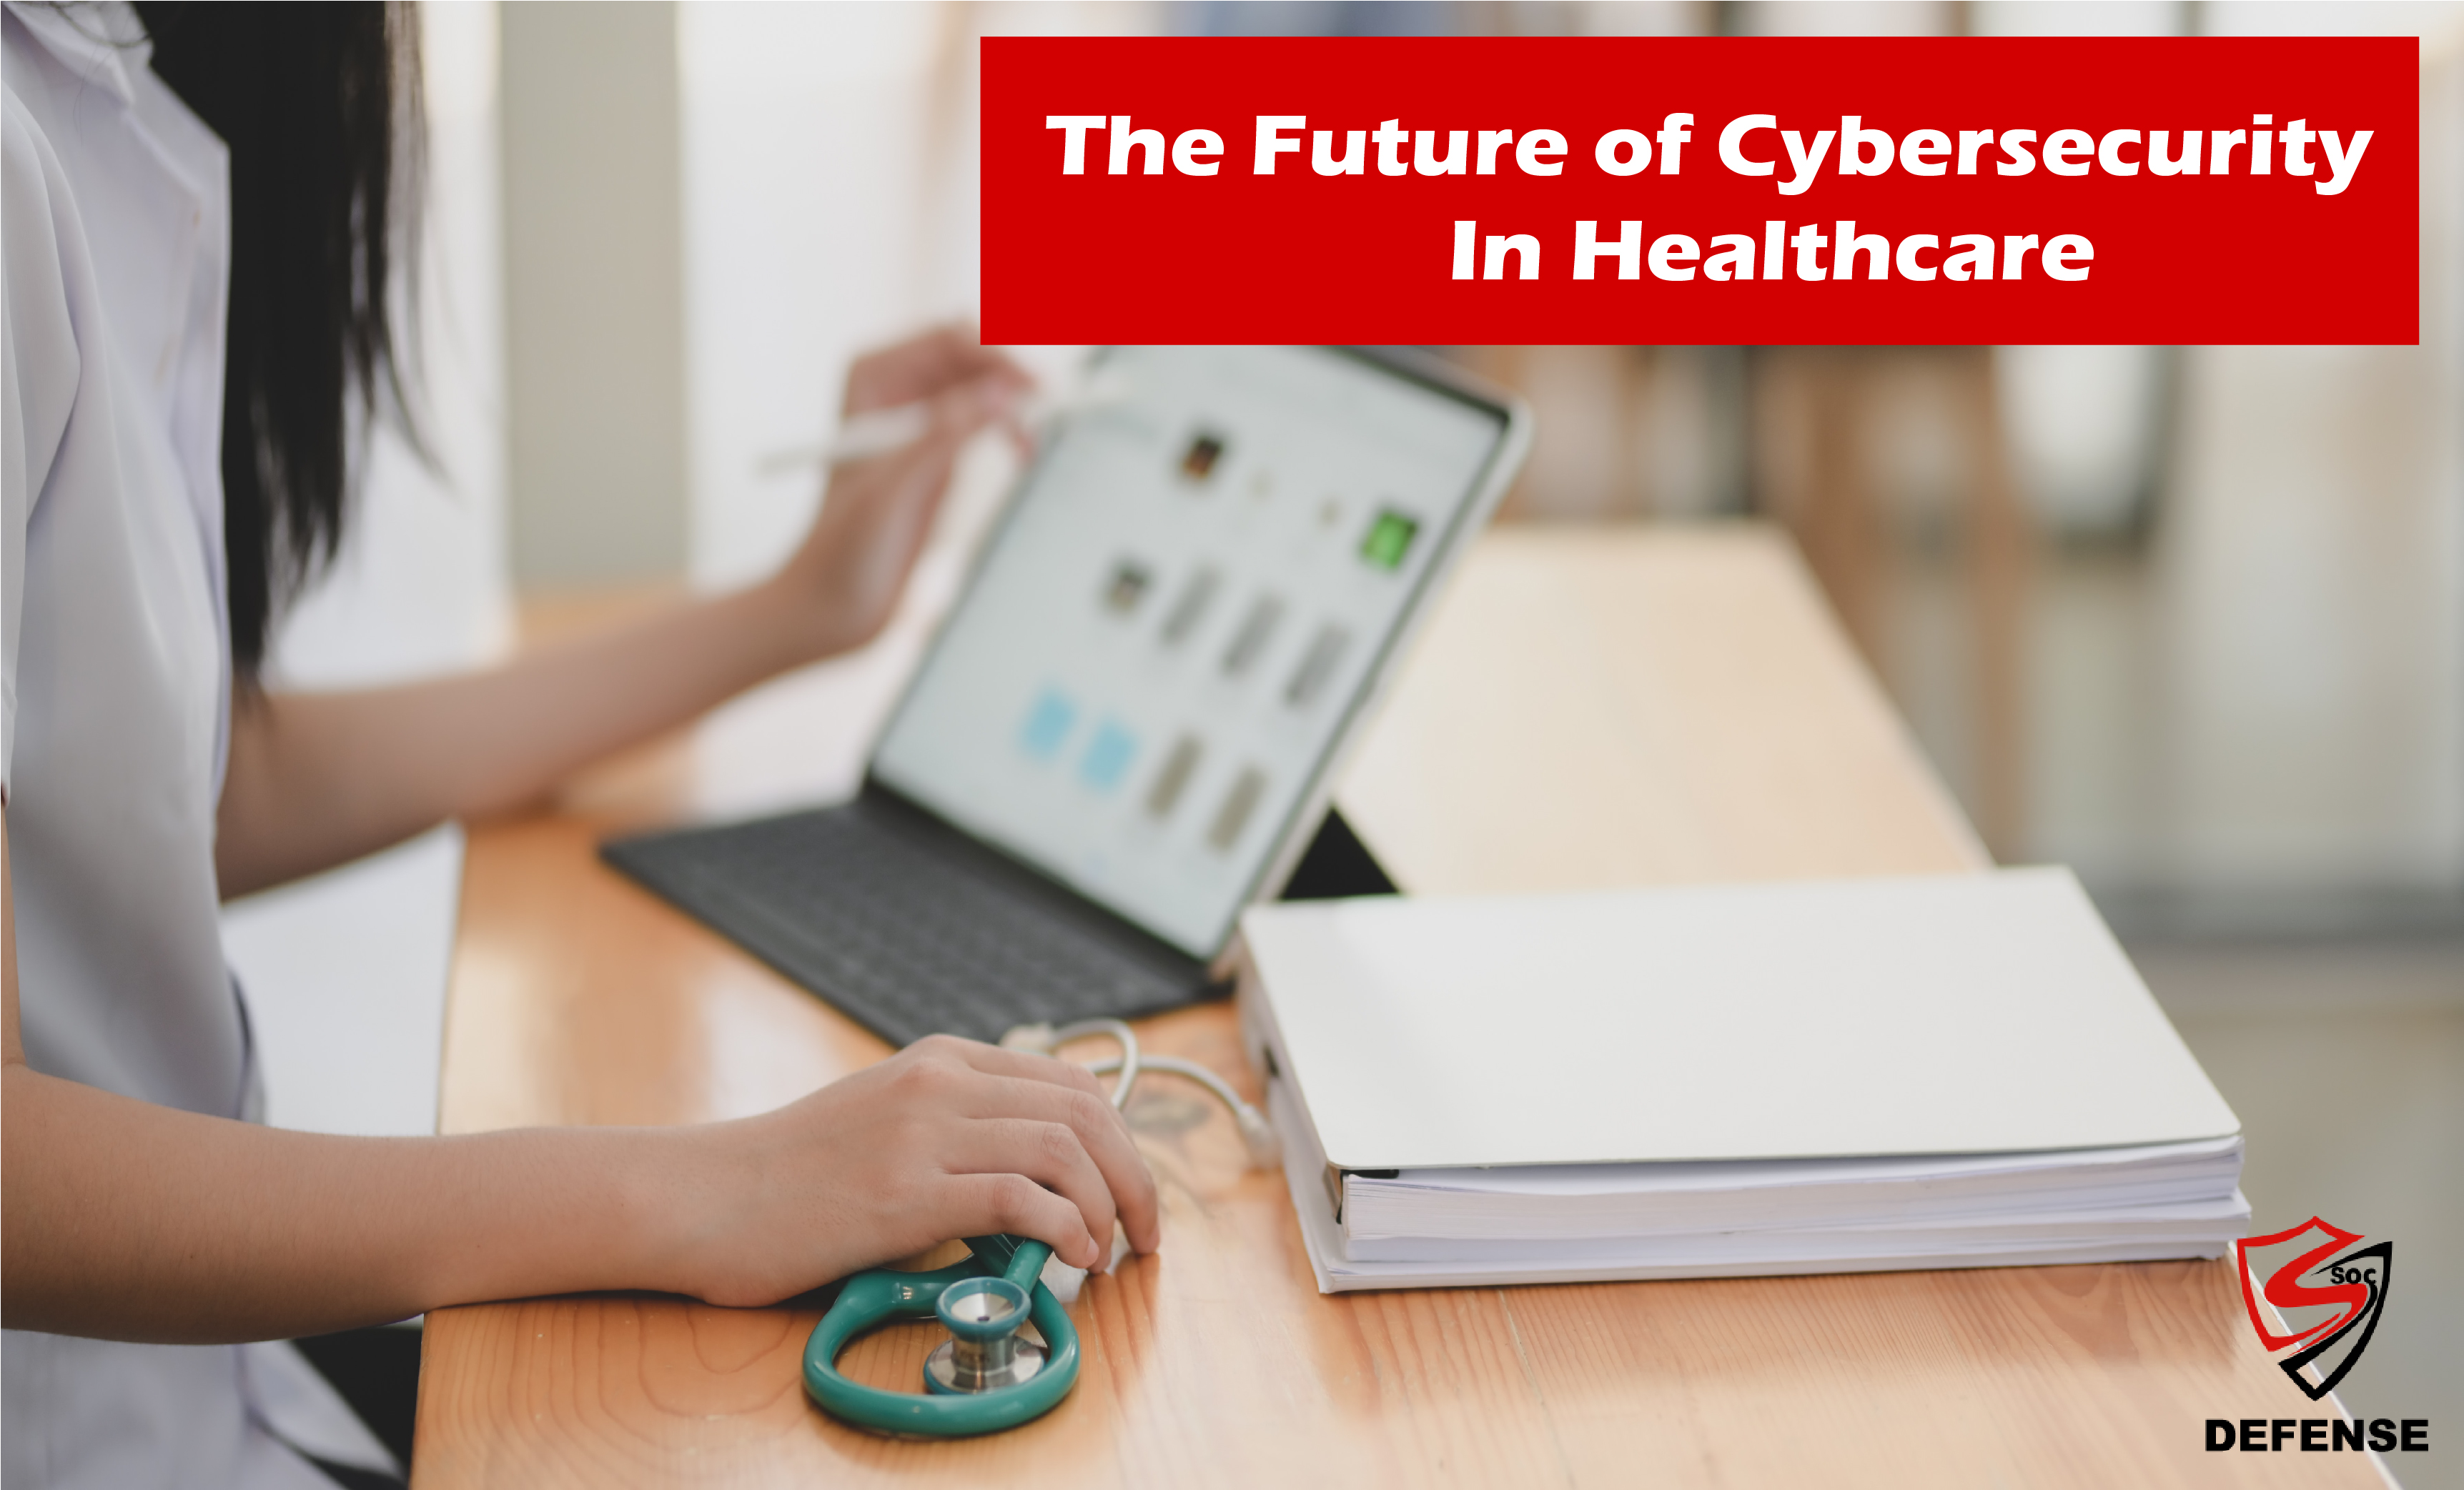 The future of cybersecurity in healthcare